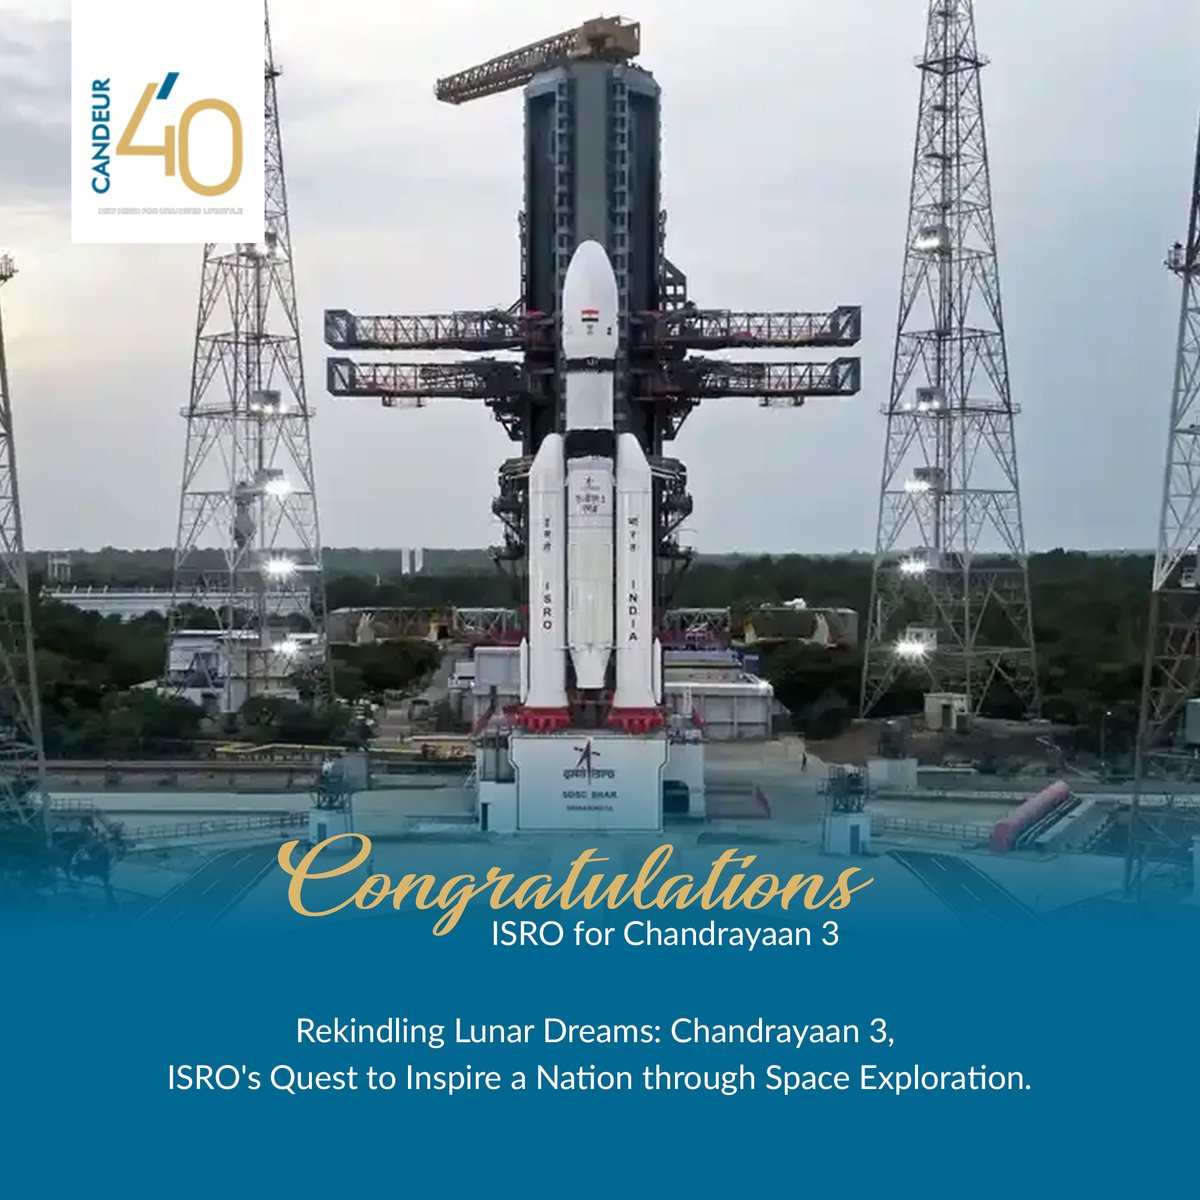 'India's Lunar Ambition Unleashed: Chandrayaan 3, ISRO's Next Chapter in Space Exploration.'
#Chandrayaan3 #ISROMission #MoonExploration #LunarMysteries  #IndiaToTheMoon #SpaceOdyssey #ISROLegacy #LunarDiscoveries #InspiringNation #SpaceAmbitions #GiantLeapForIndia #NewHorizons